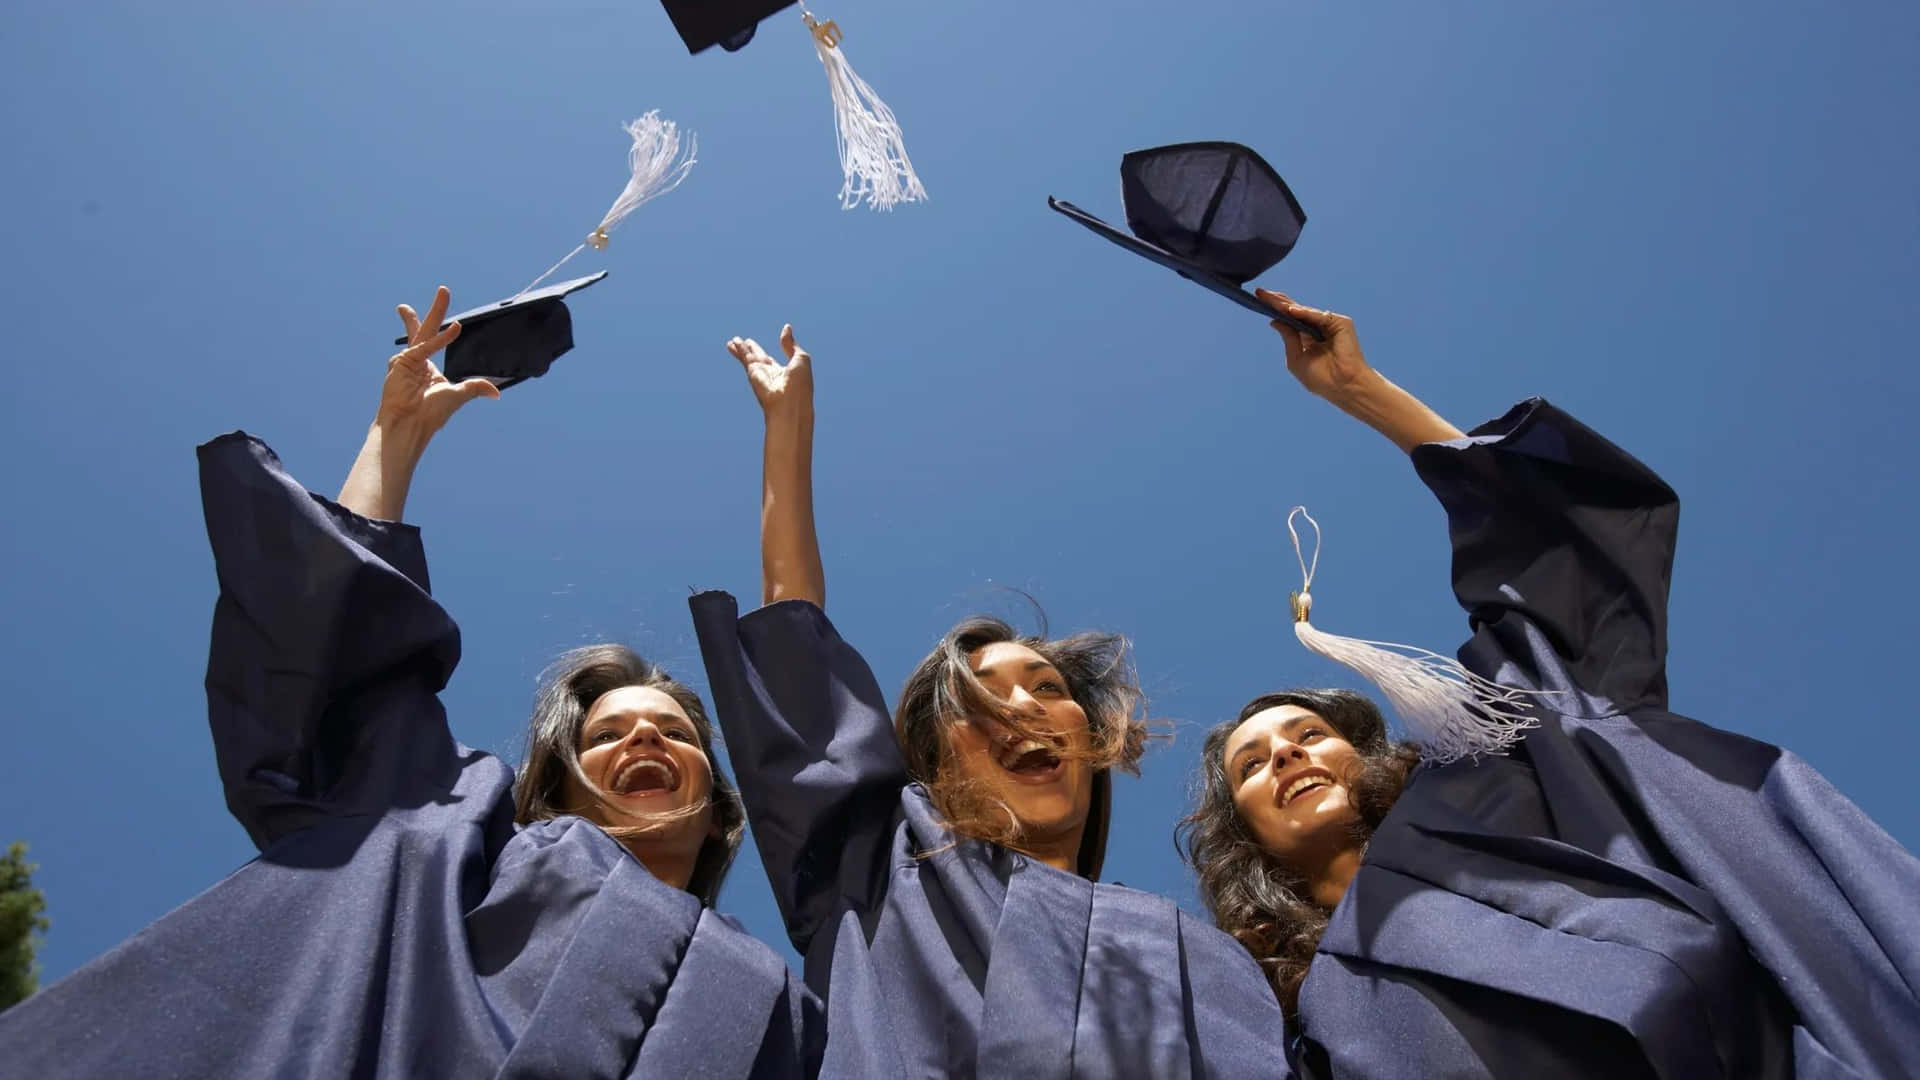 Three Graduates Tossing Their Caps In The Air